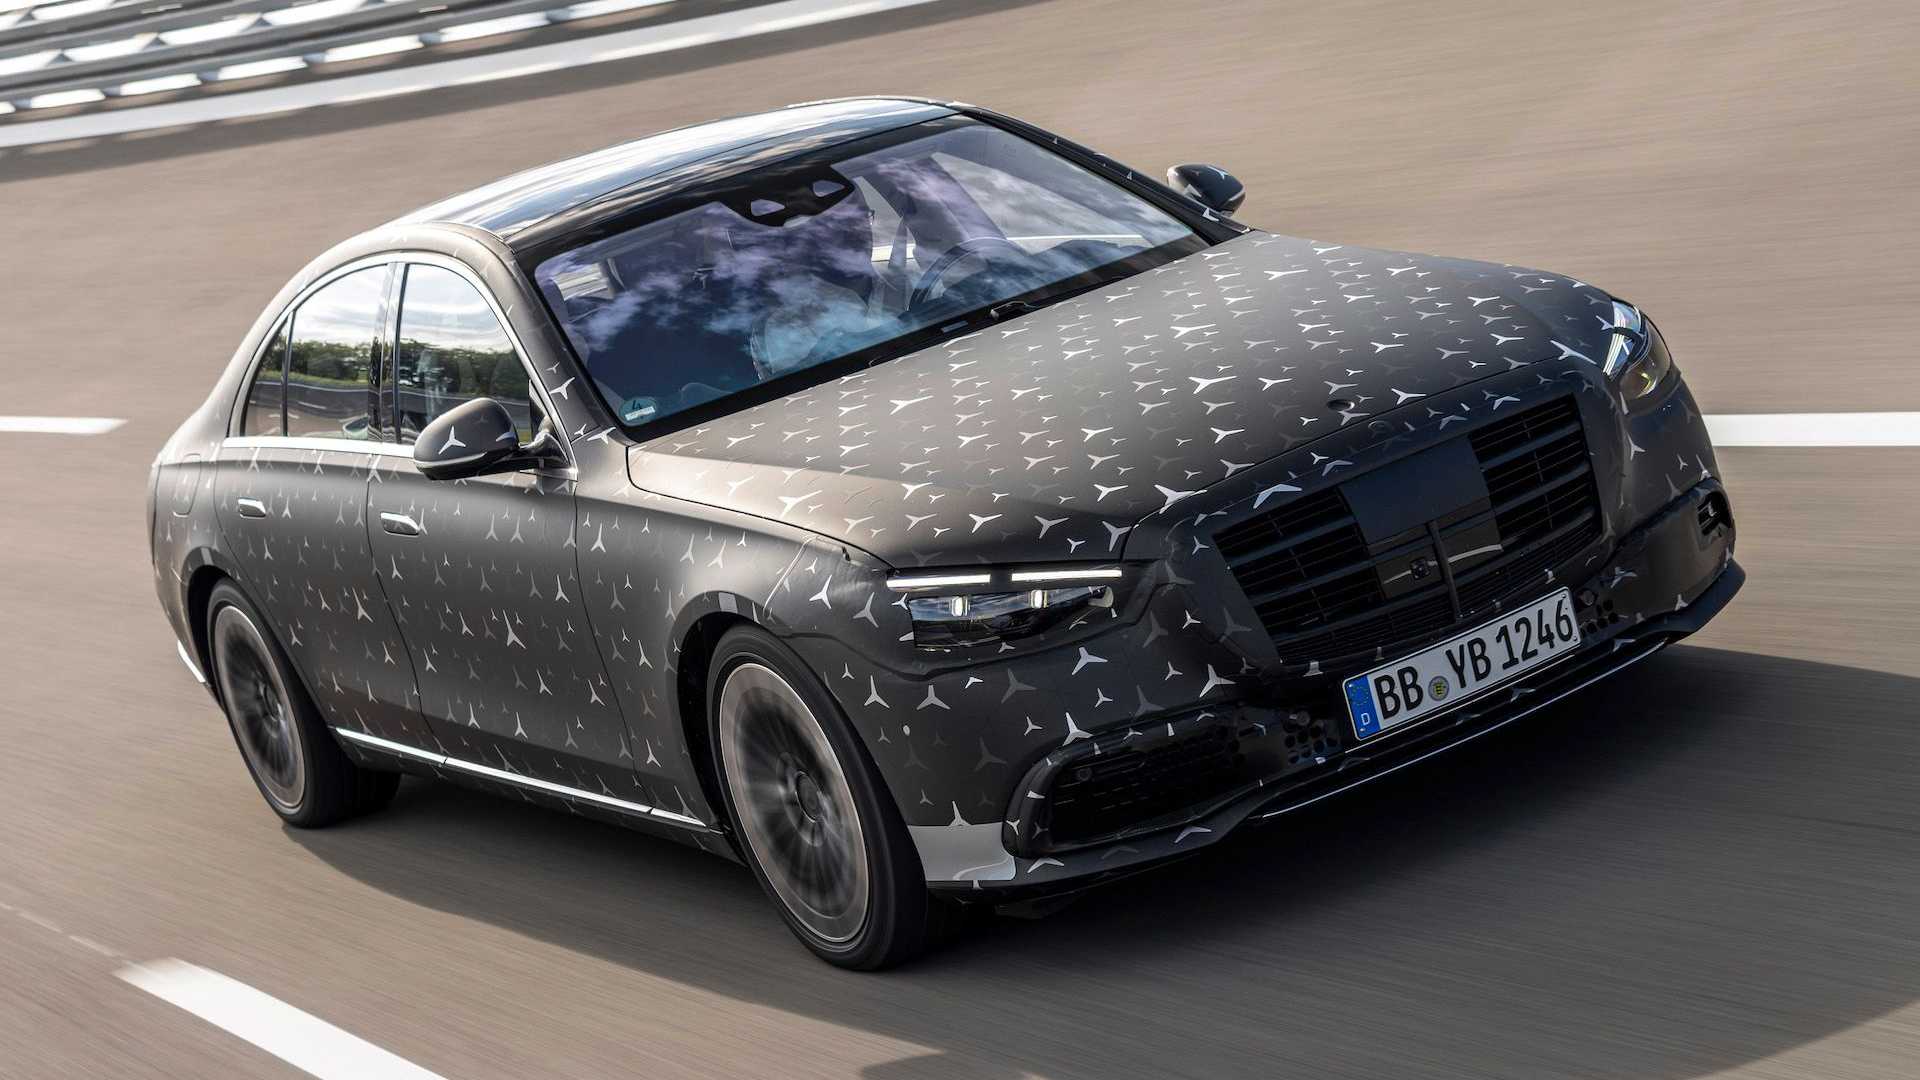 New Mercedes-Benz S-Class to get e-active body control